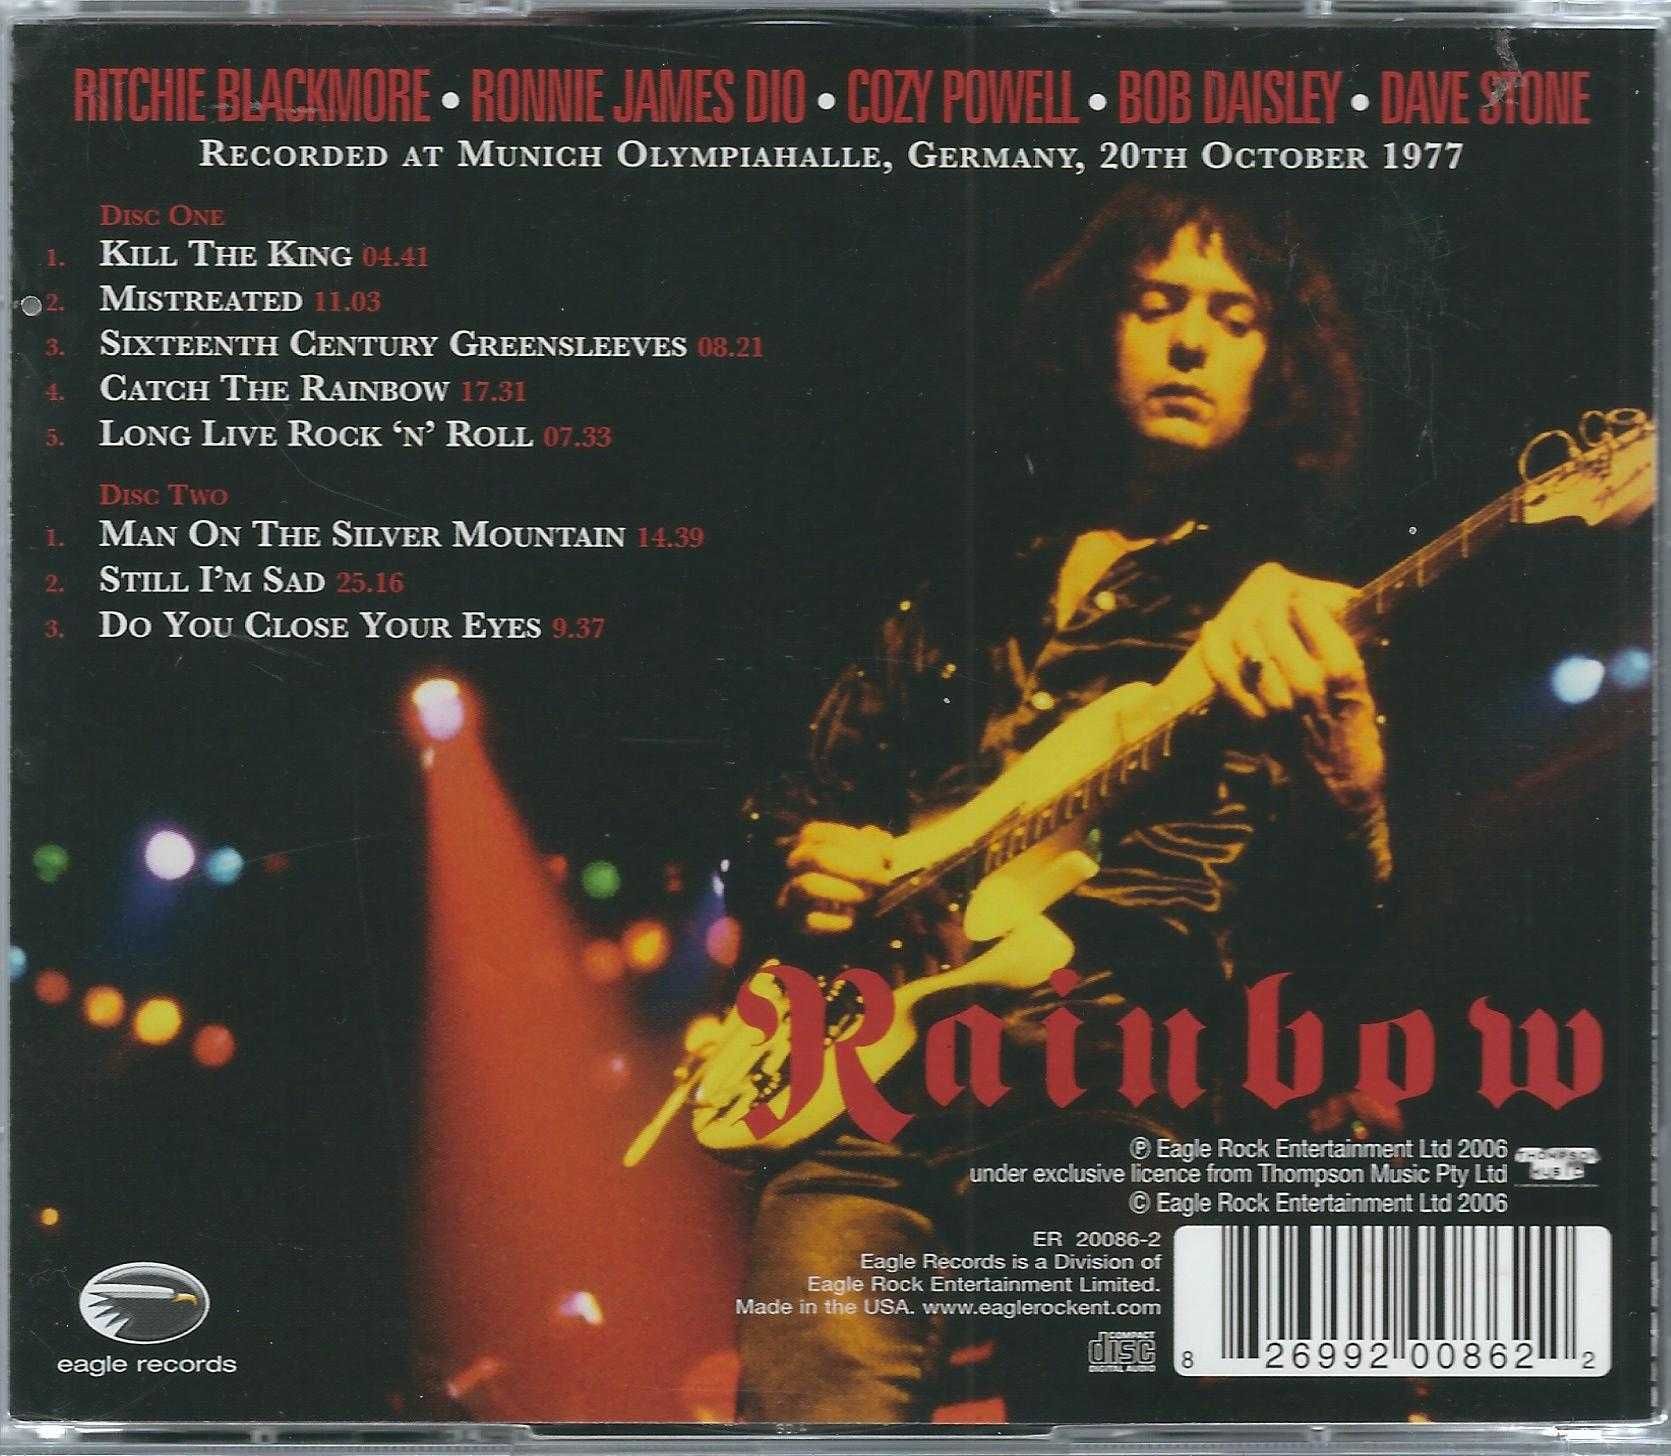 2 CD Rainbow - Live In Munich 1977 (2006) (Eagle Records)